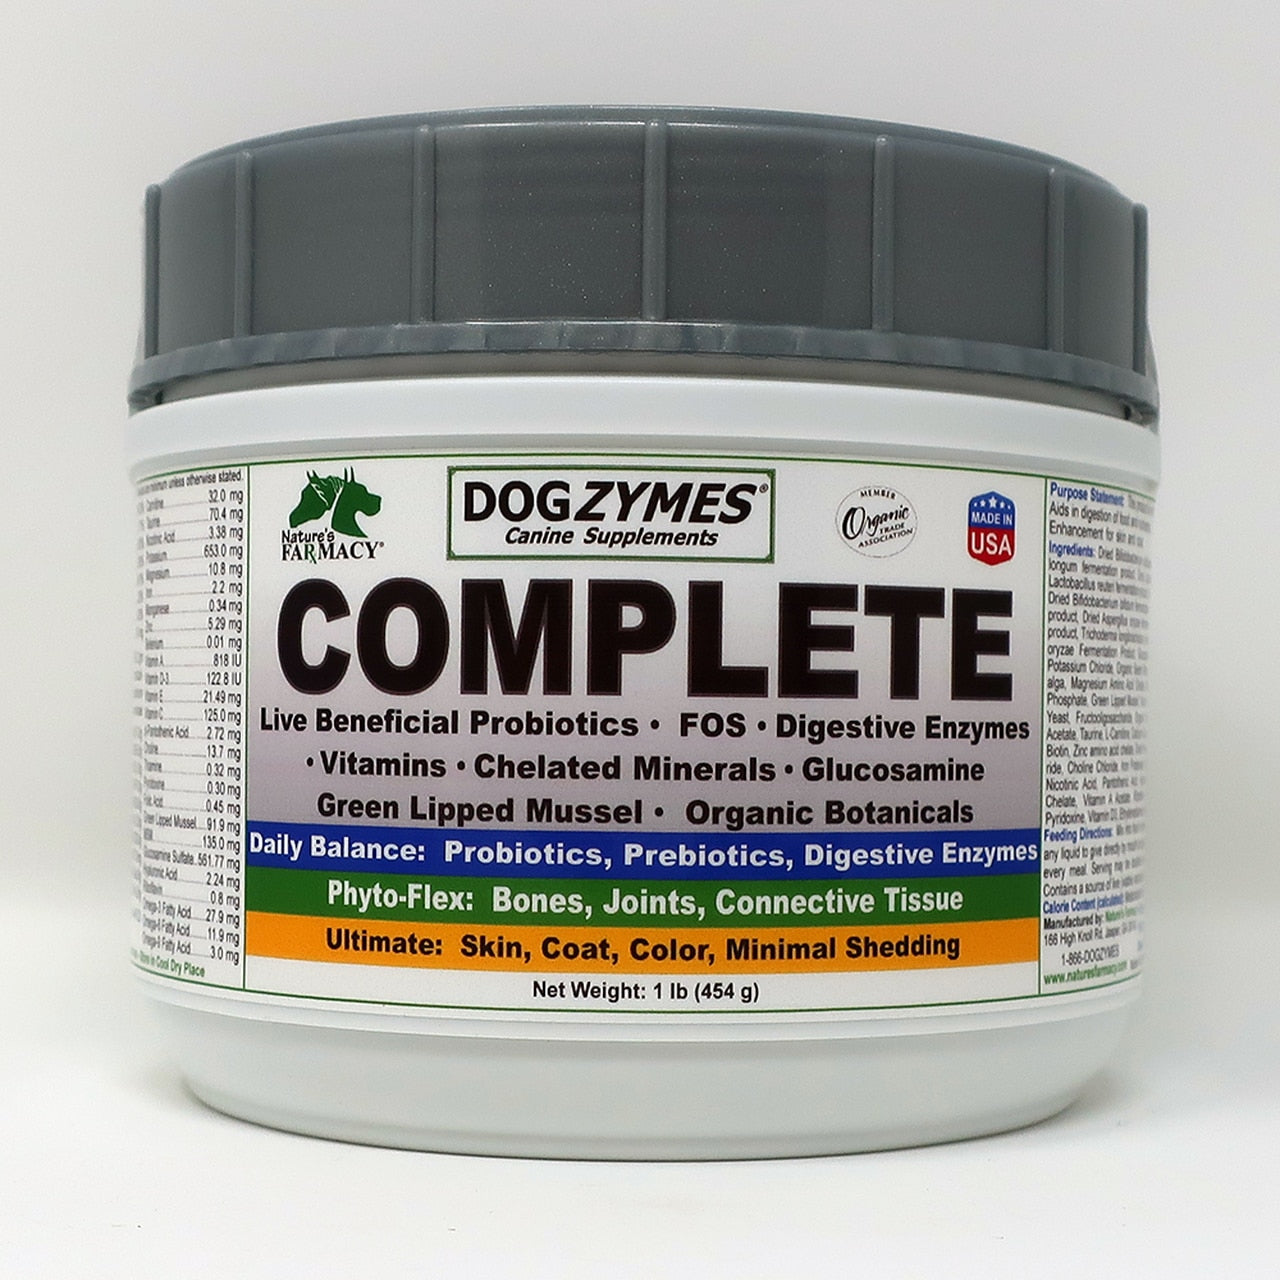 Natures Farmacy Dogzymes Complete Supplement For Dogs